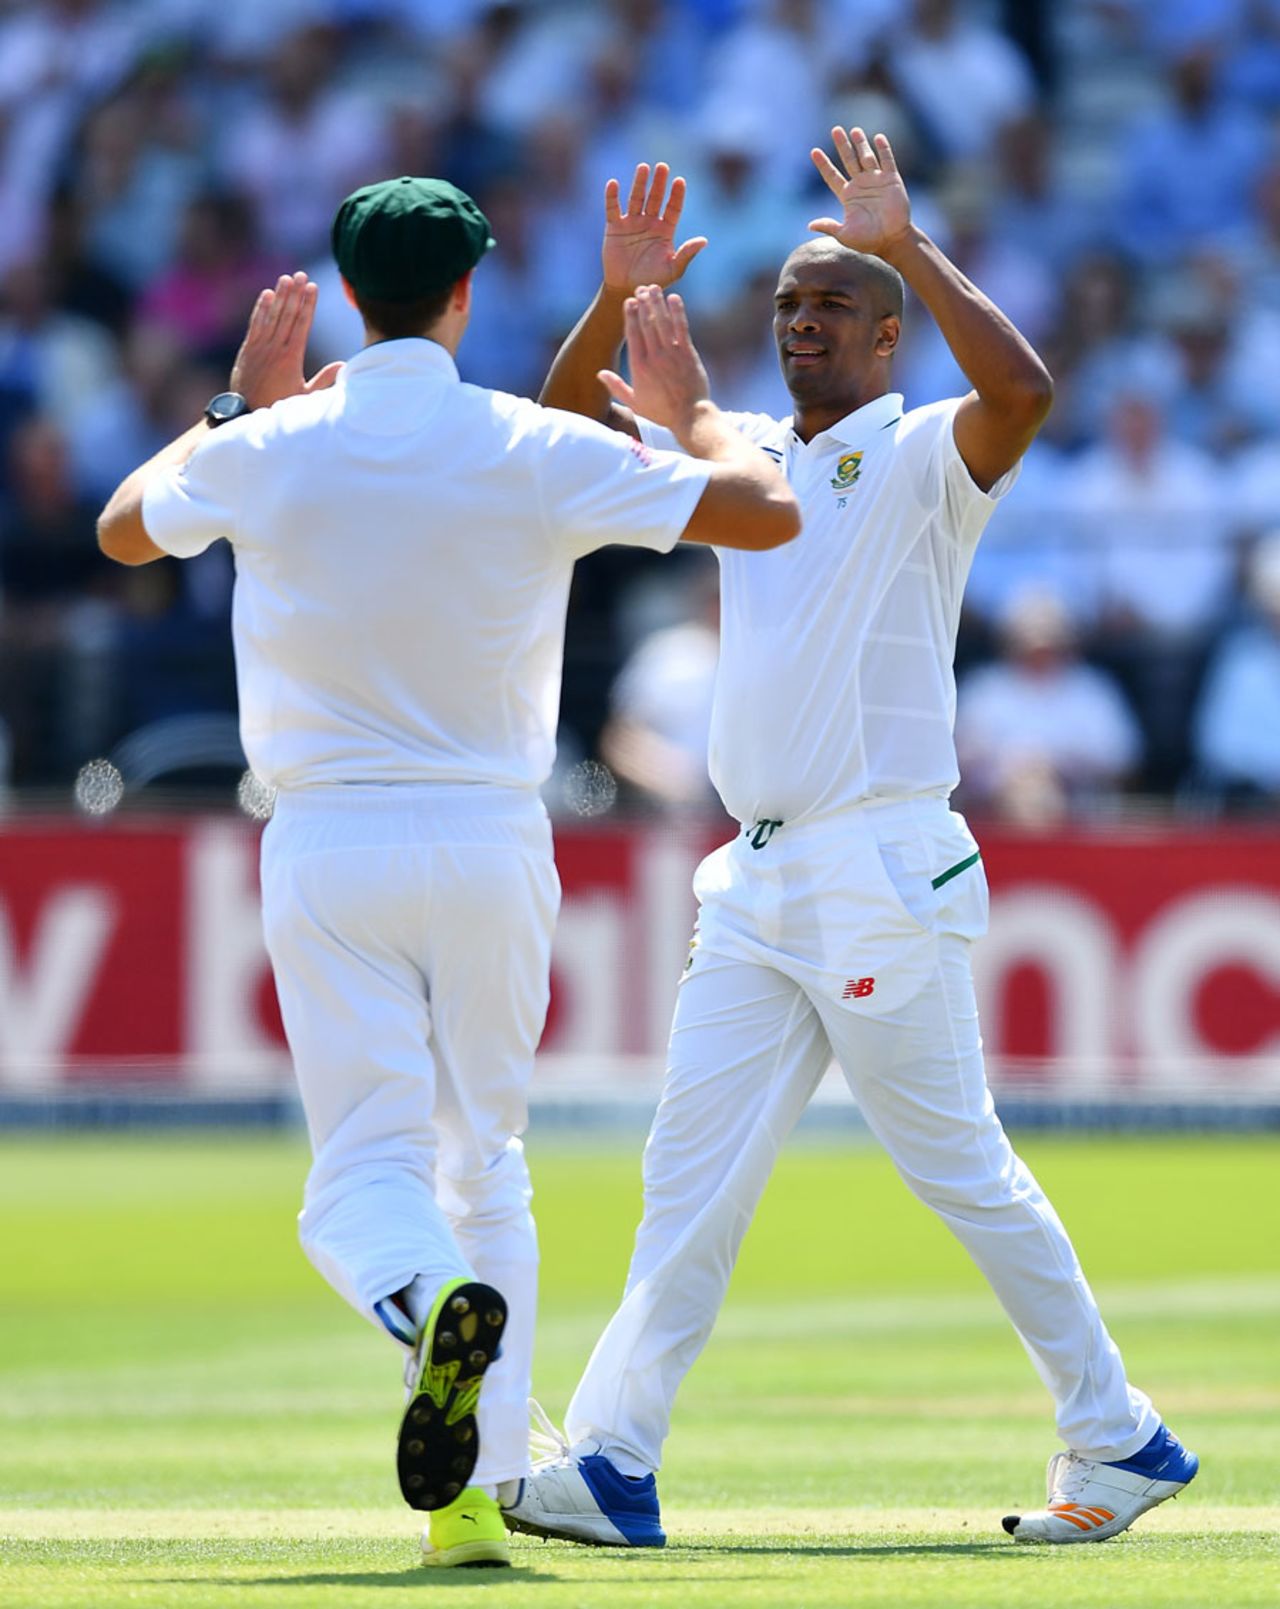 Vernon Philander struck in his second over, England v South Africa, 1st Investec Test, Lord's, 1st day, July 6, 2017